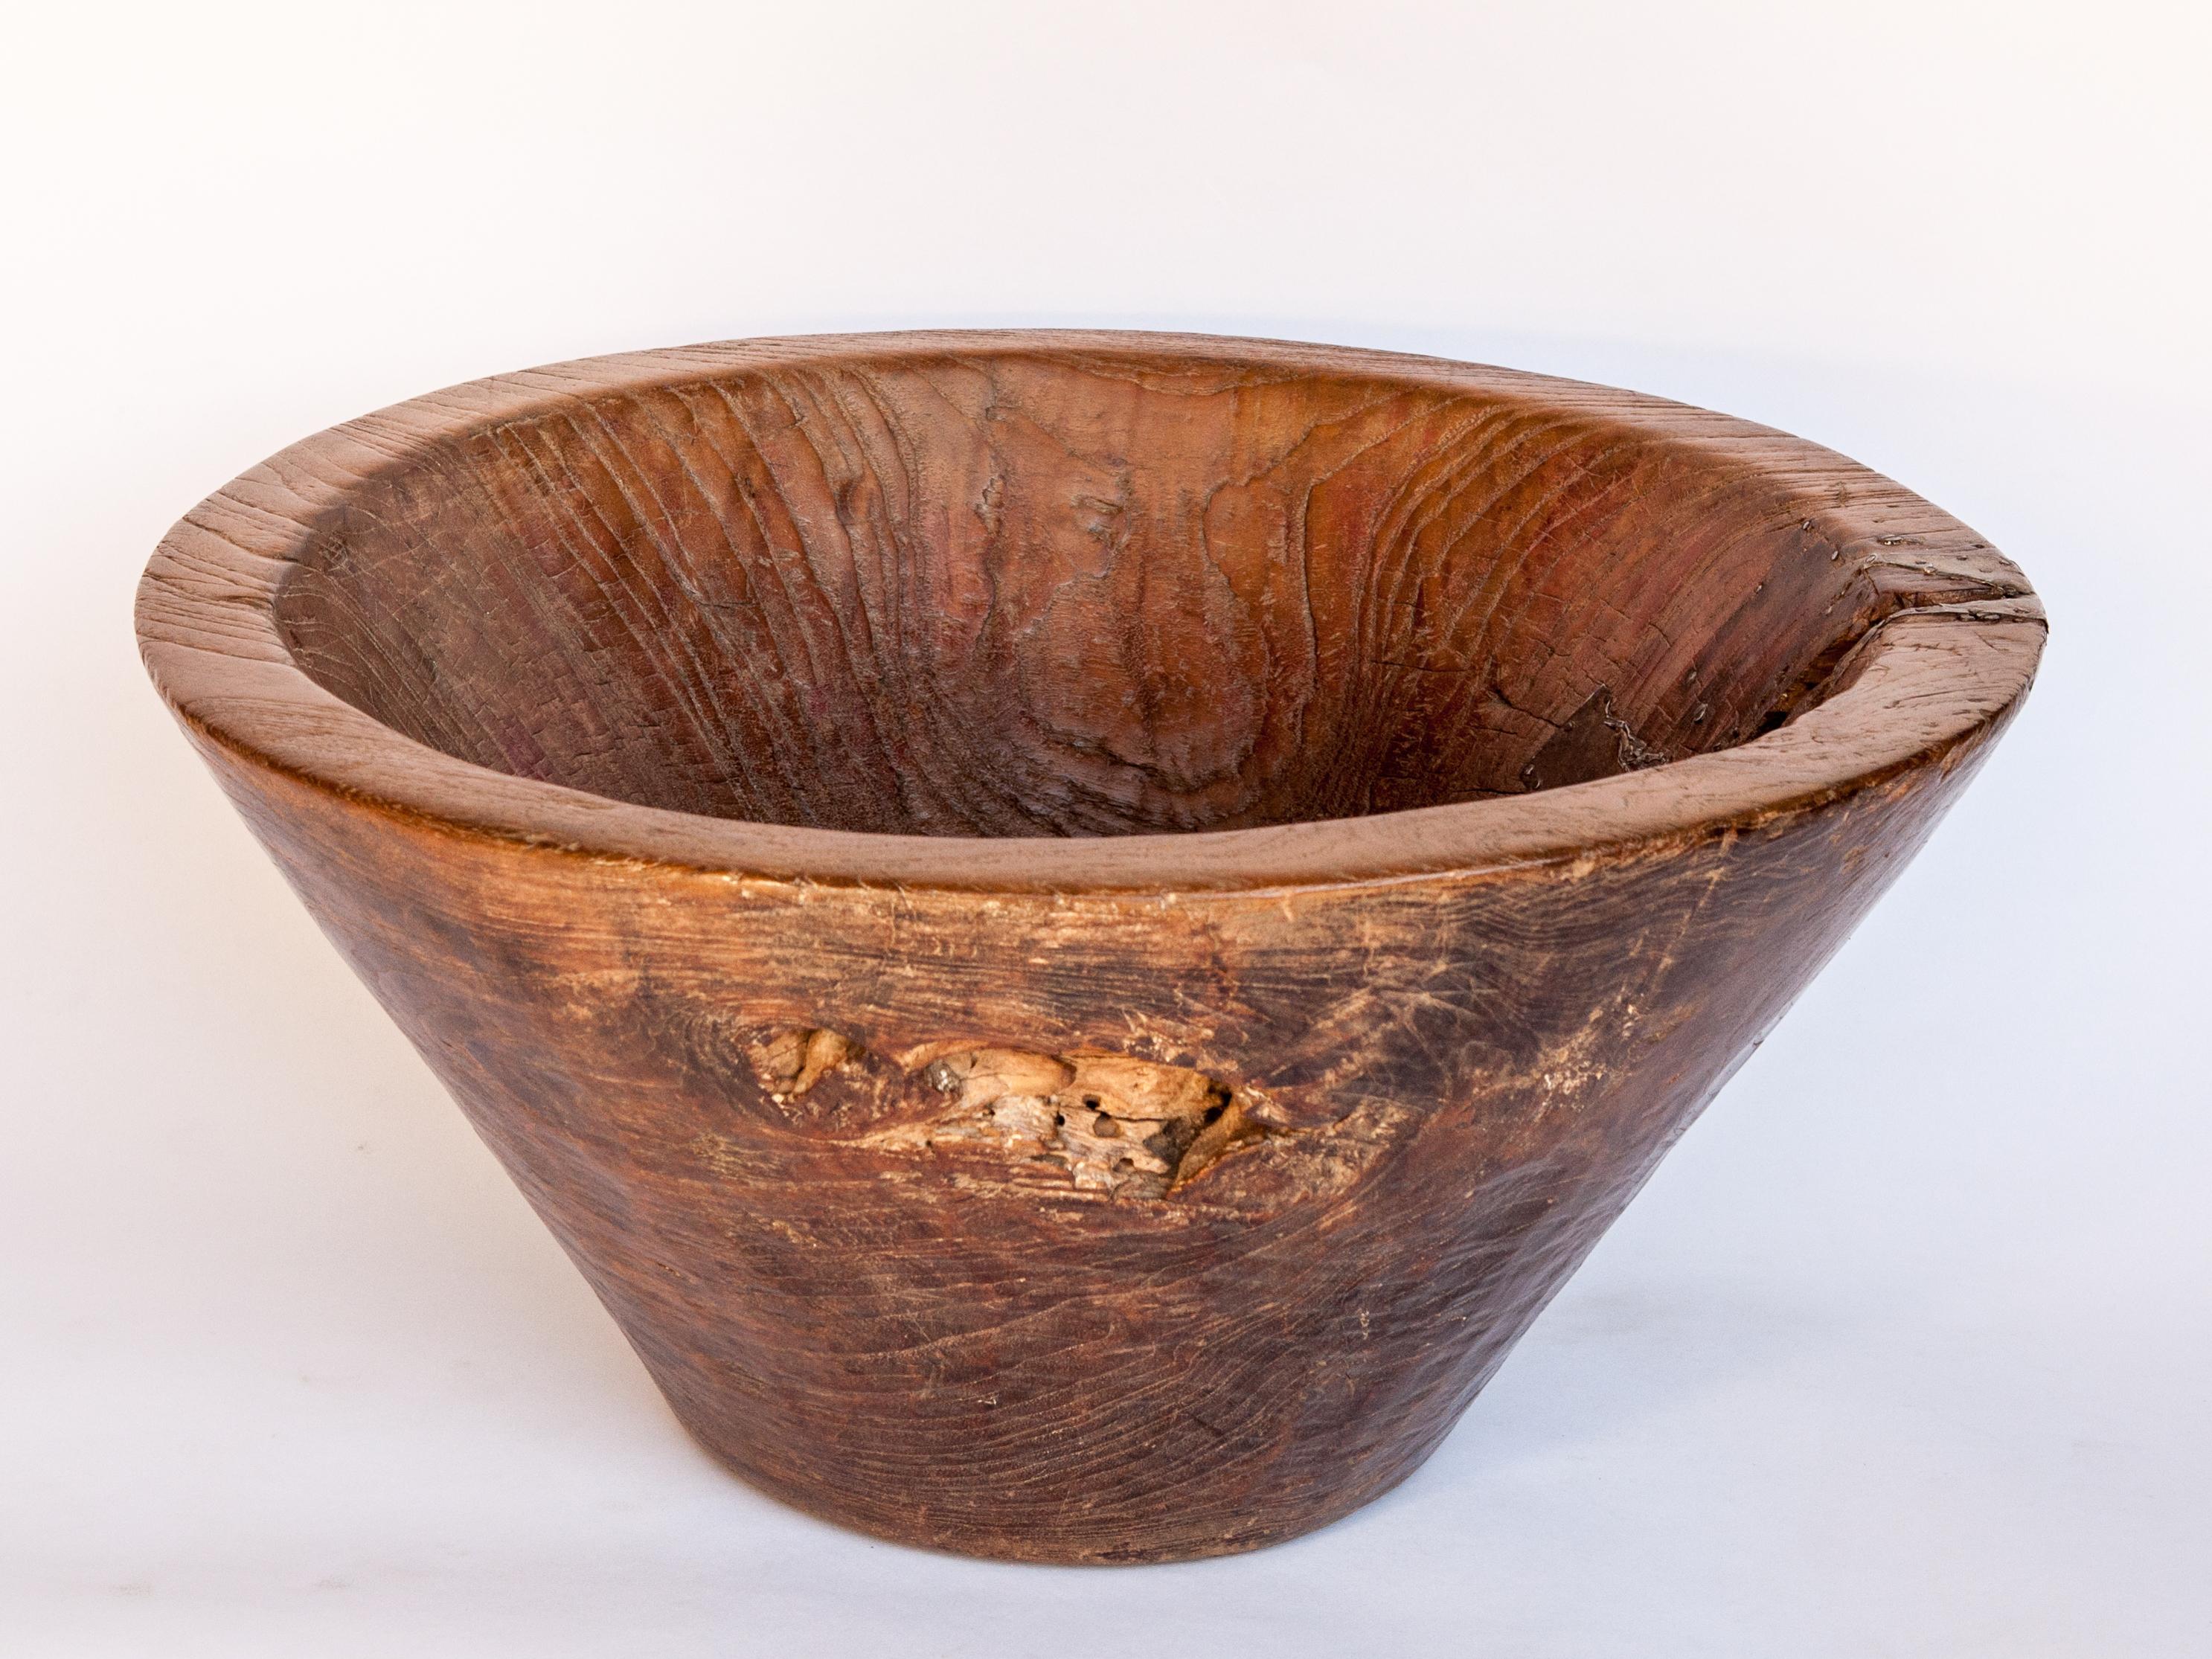 Large vintage teak bowl, hand hewn, 20.75 inch diameter. From Cirebon, North Java, mid-20th century.
This rustic wood bowl was fashioned by hand from a single piece of teak wood and comes from the Cirebon area of Northern Java. It would have been